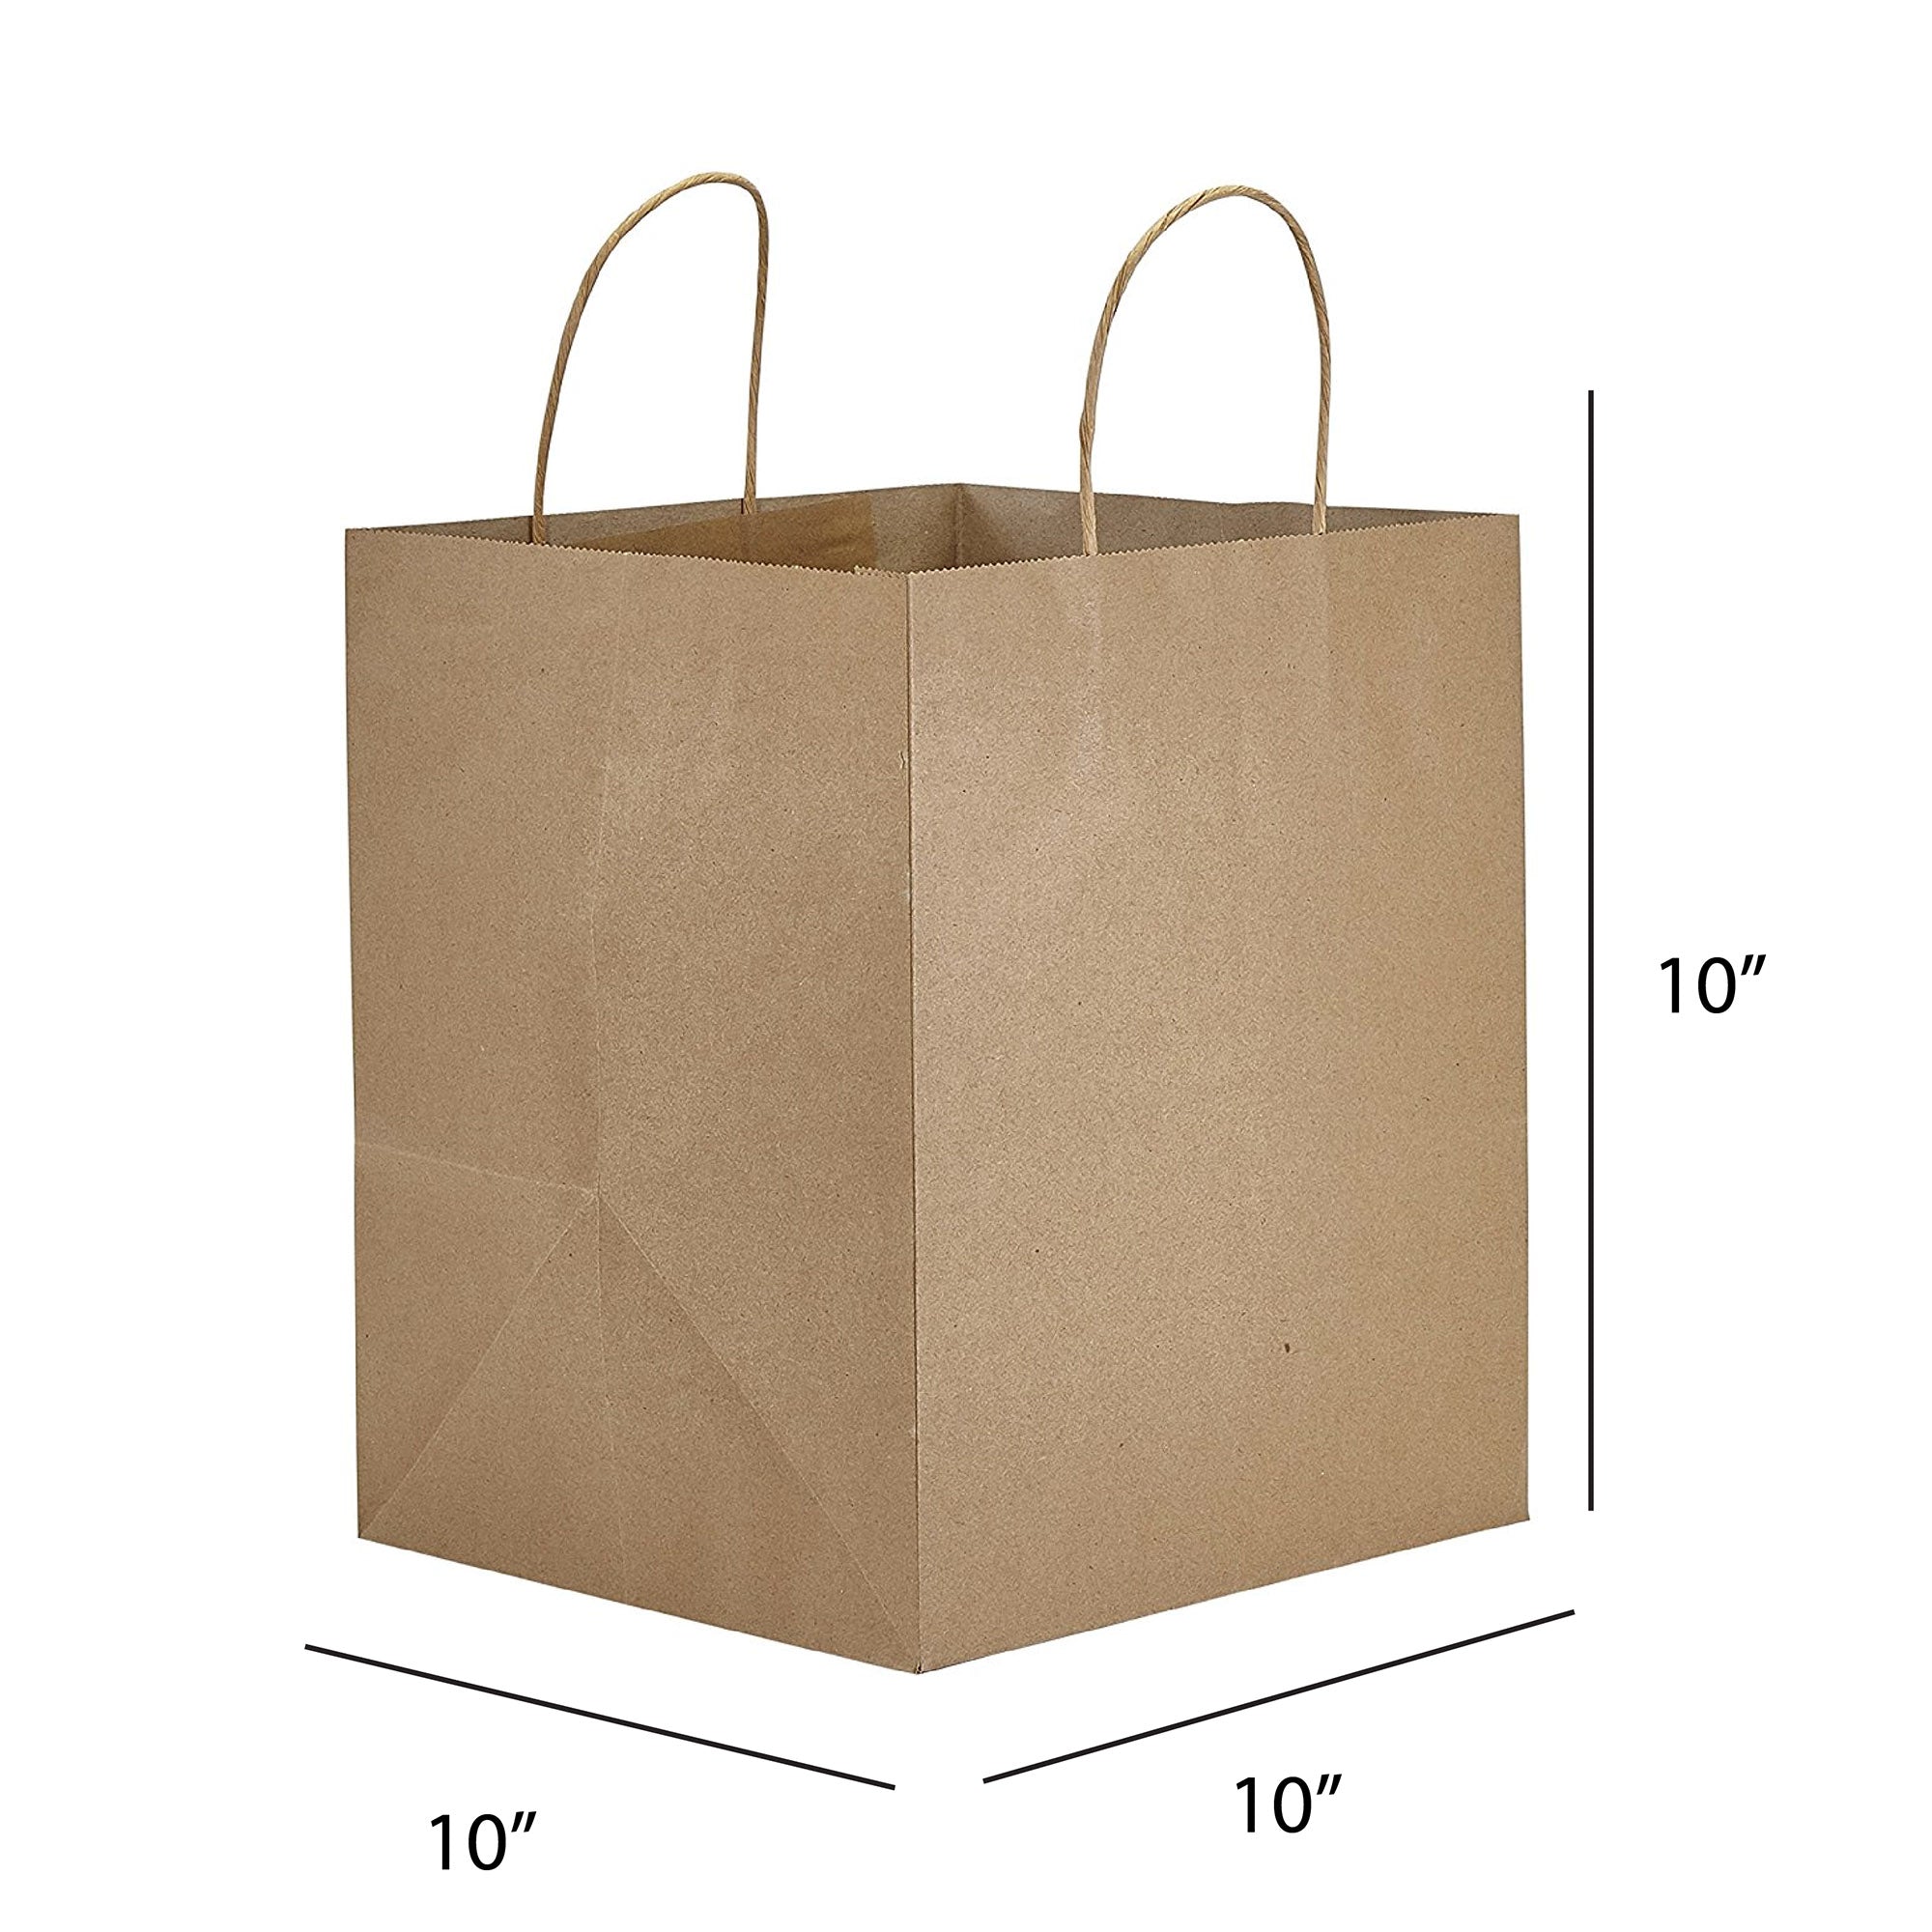 Wholesale Kraft Paper Bags for Retail & Food Service